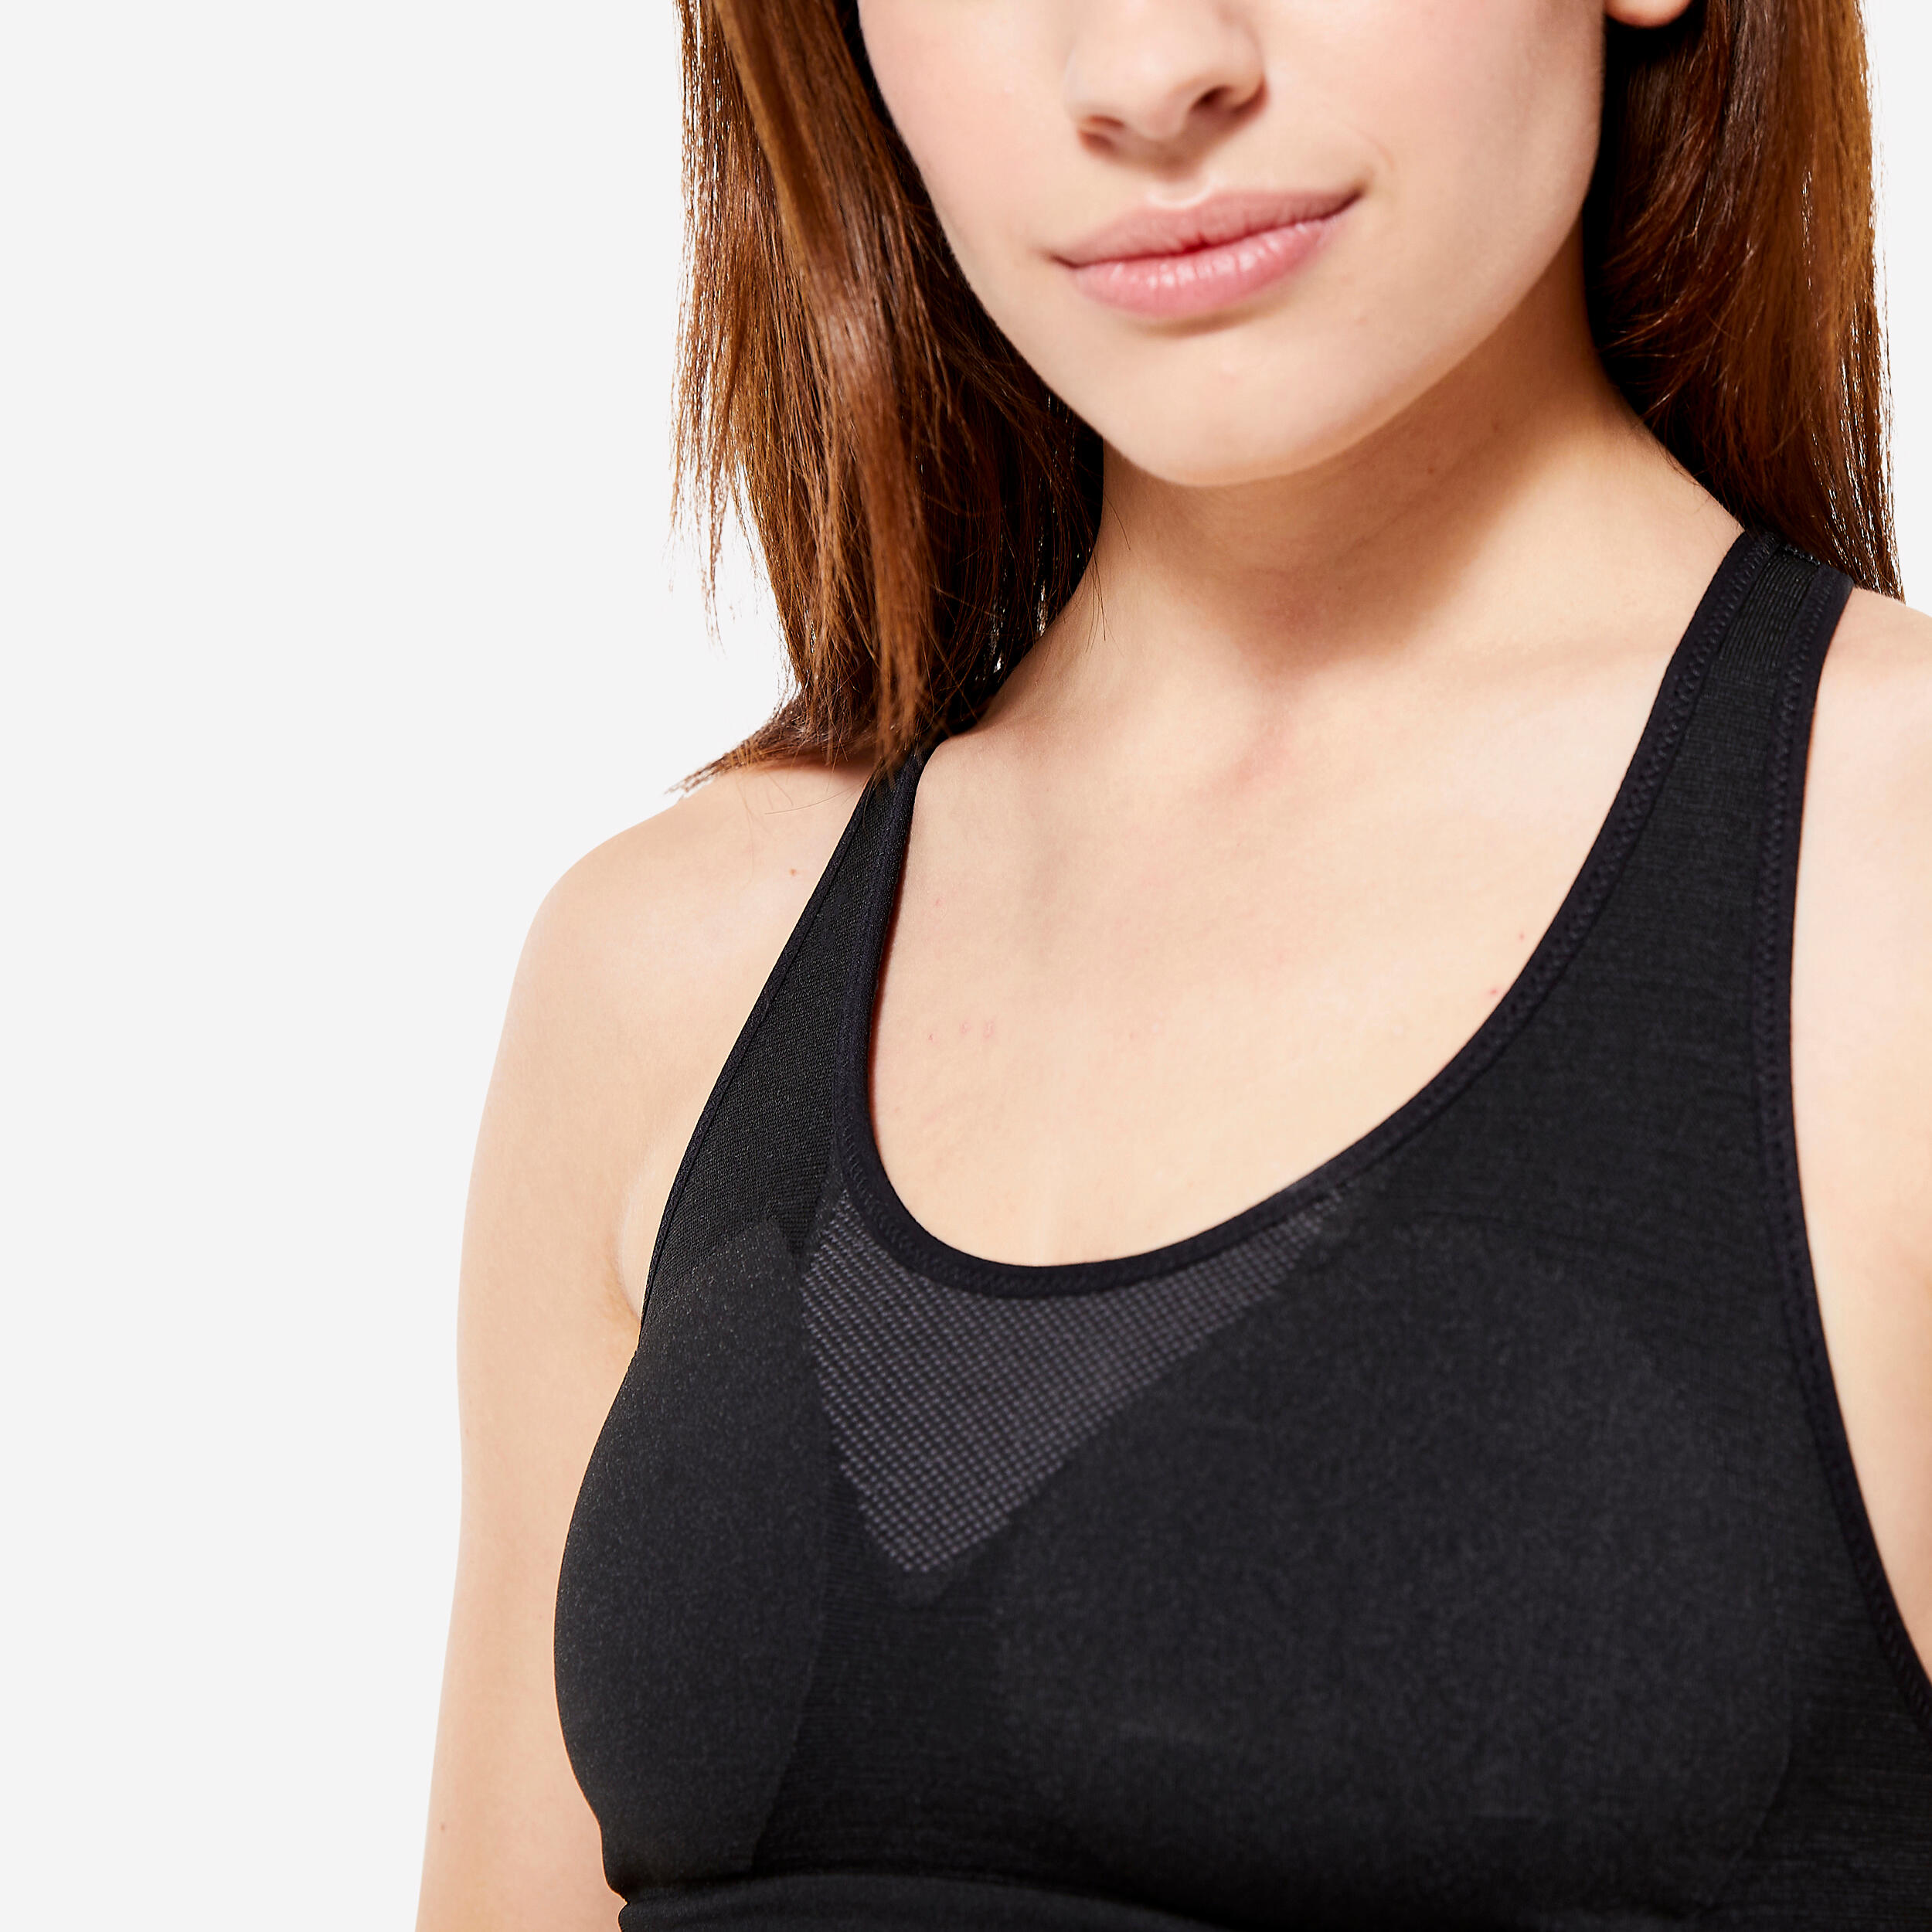 Women’s Muscle Back Seamless Bra with Medium Support - Black